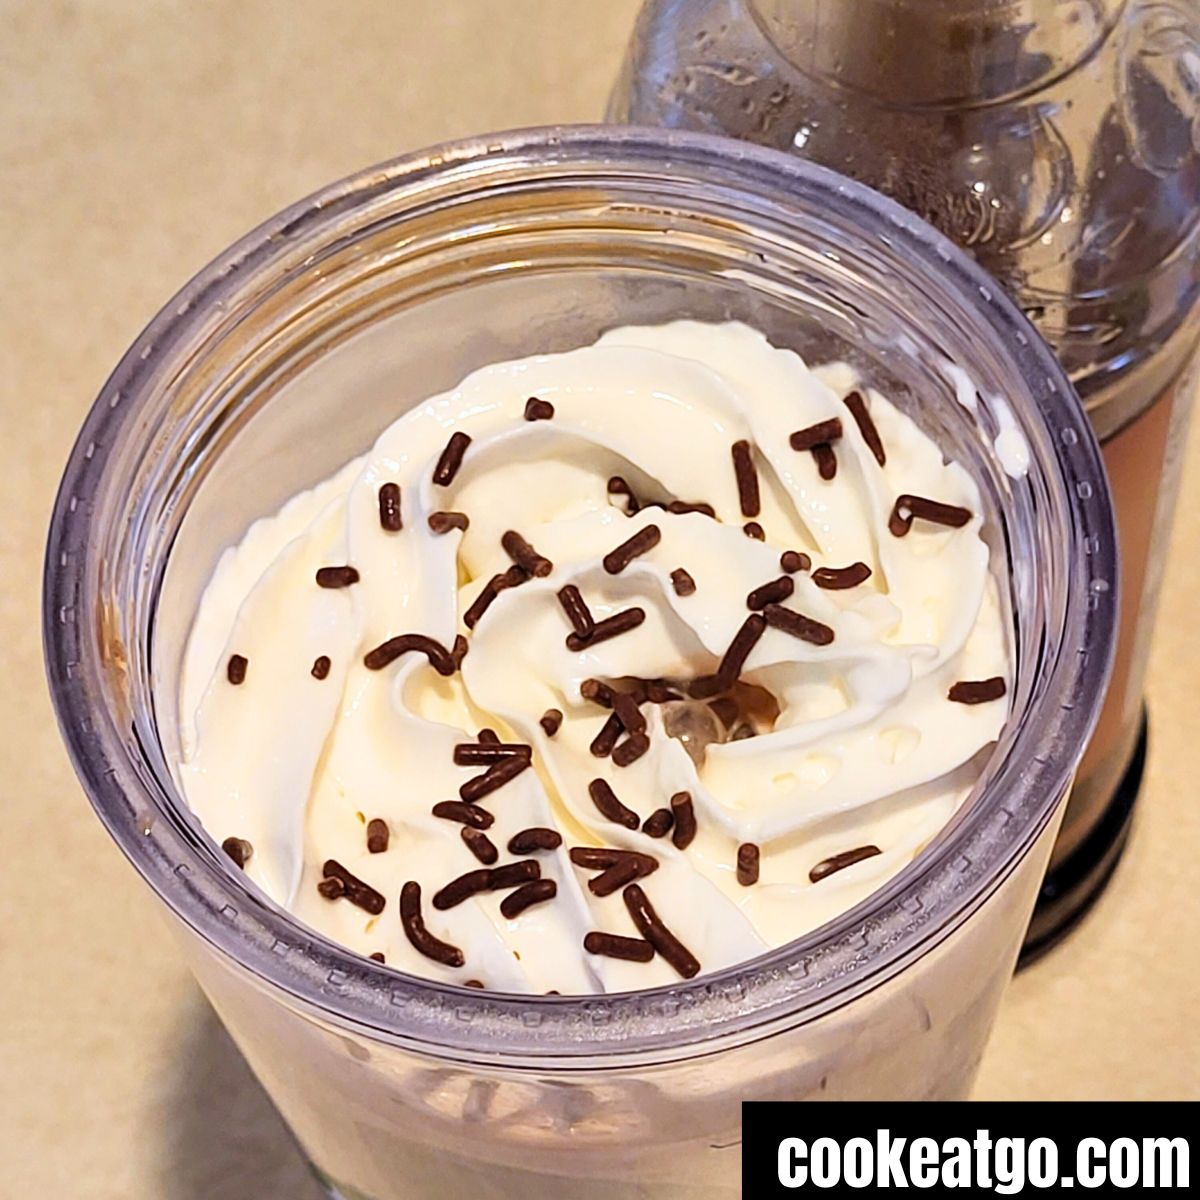 Skinny Mocha topped with whipped topping and sprinkles next to skinny mocha syrup